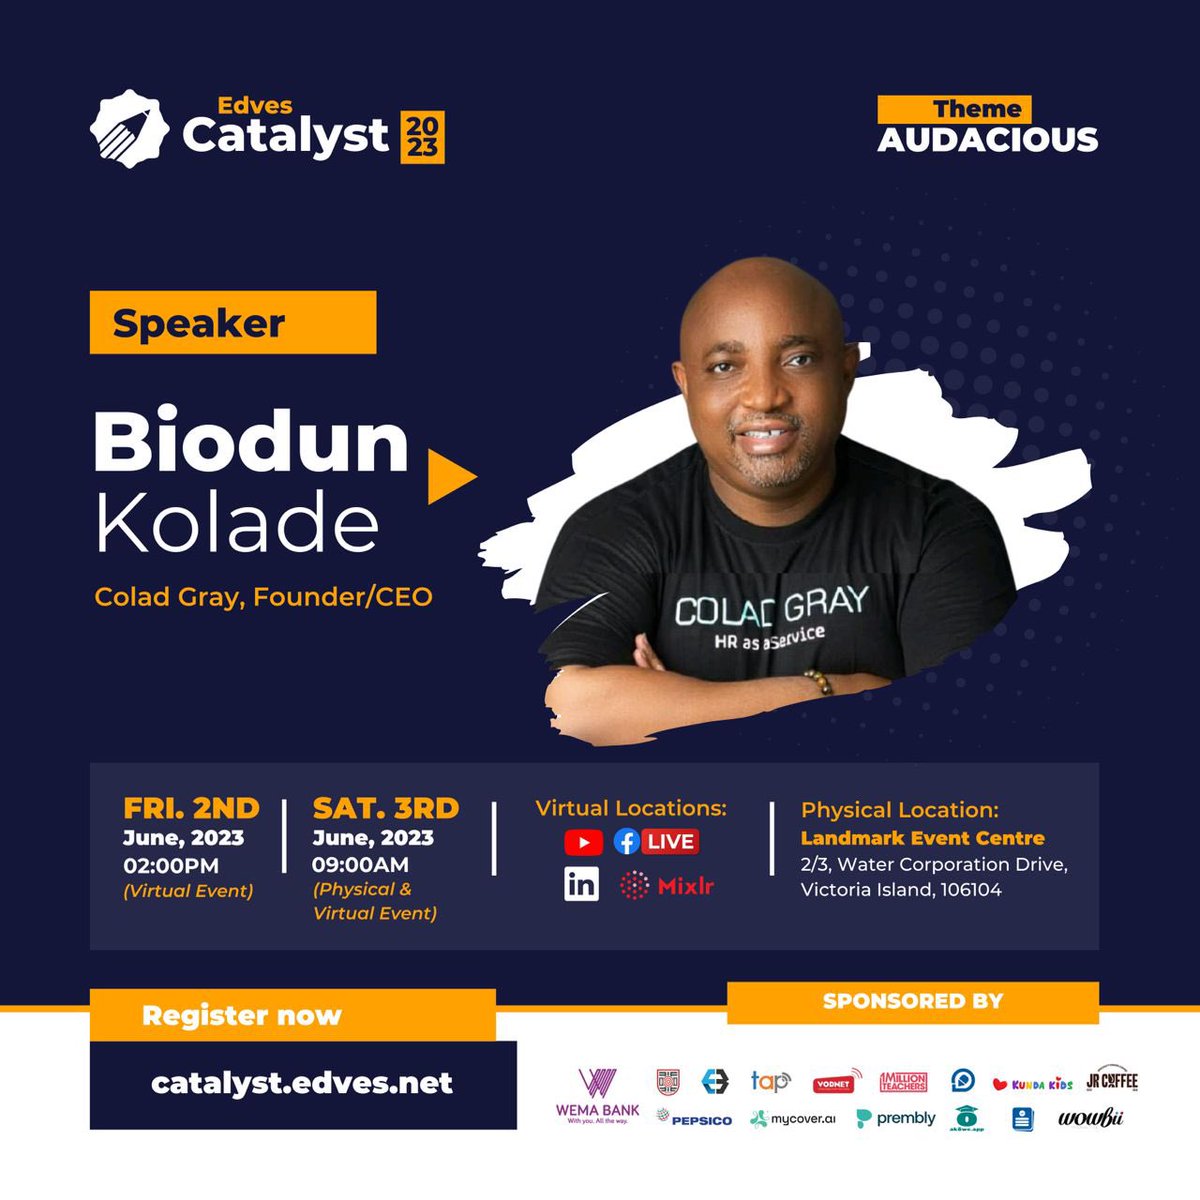 Save the Date📌

Colad Gray would be live at the 2023 Edves Catalyst Program with @EdvesSuite and @Abbeykolade 

See flyer for more details.